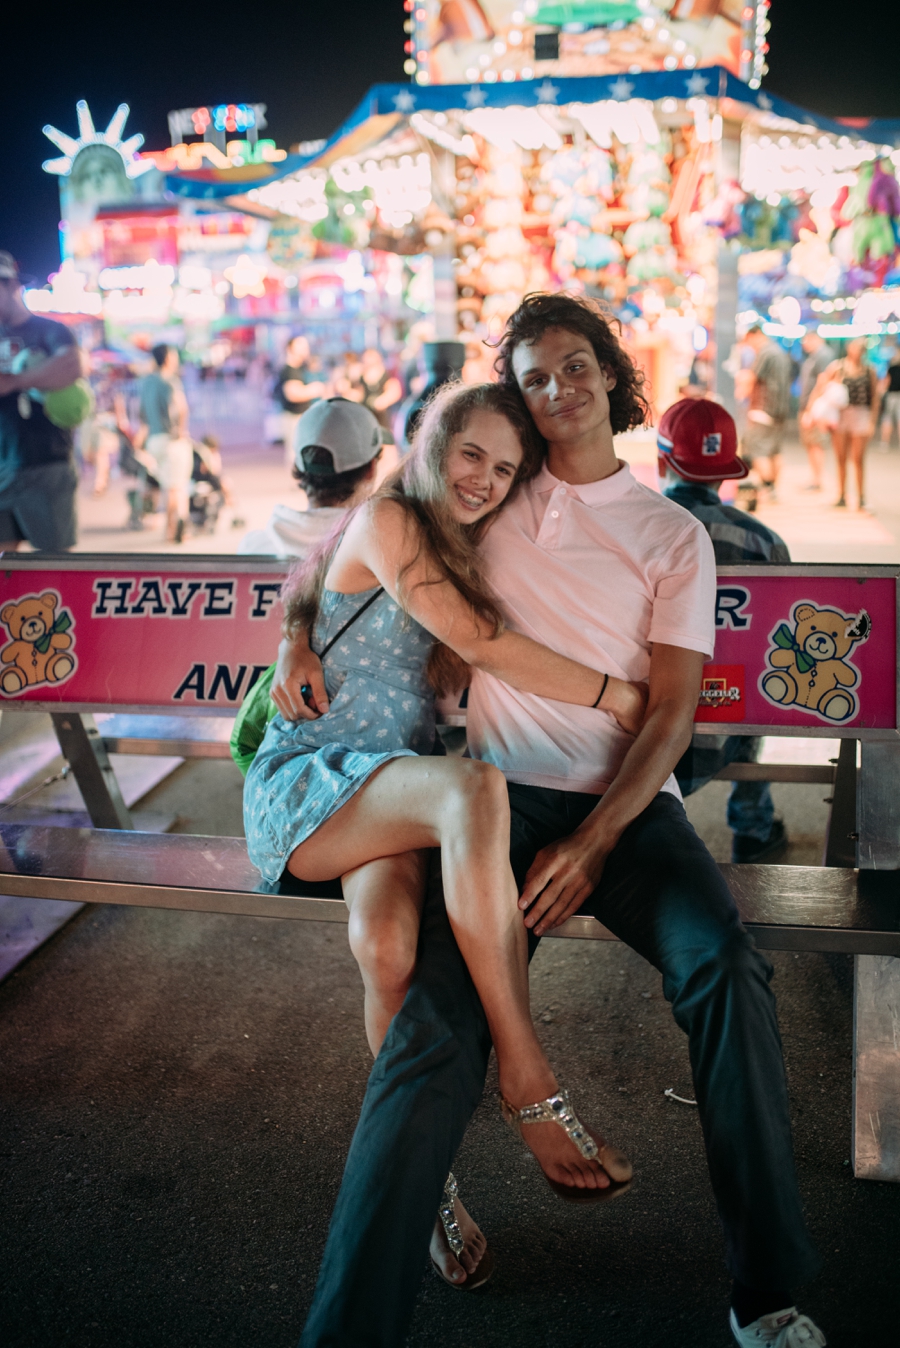 minnesota state fair editorial style portraits of couples in love